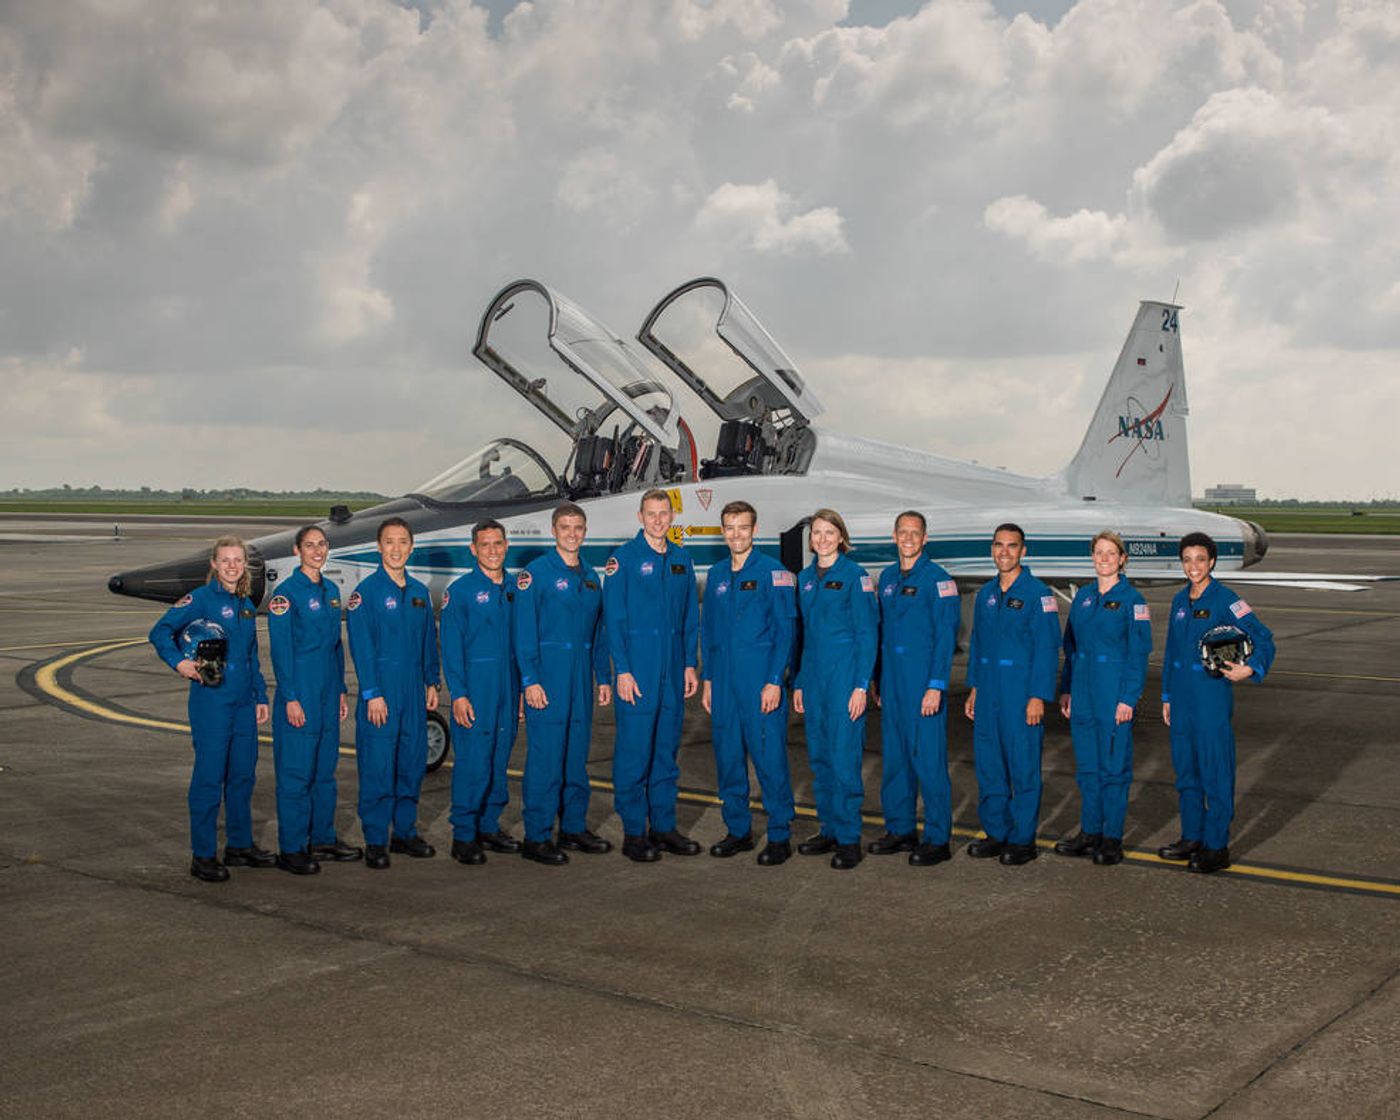 NASA has hand-selected the next generation of future astronaut candidates after sifting through a record-breaking number of applications.